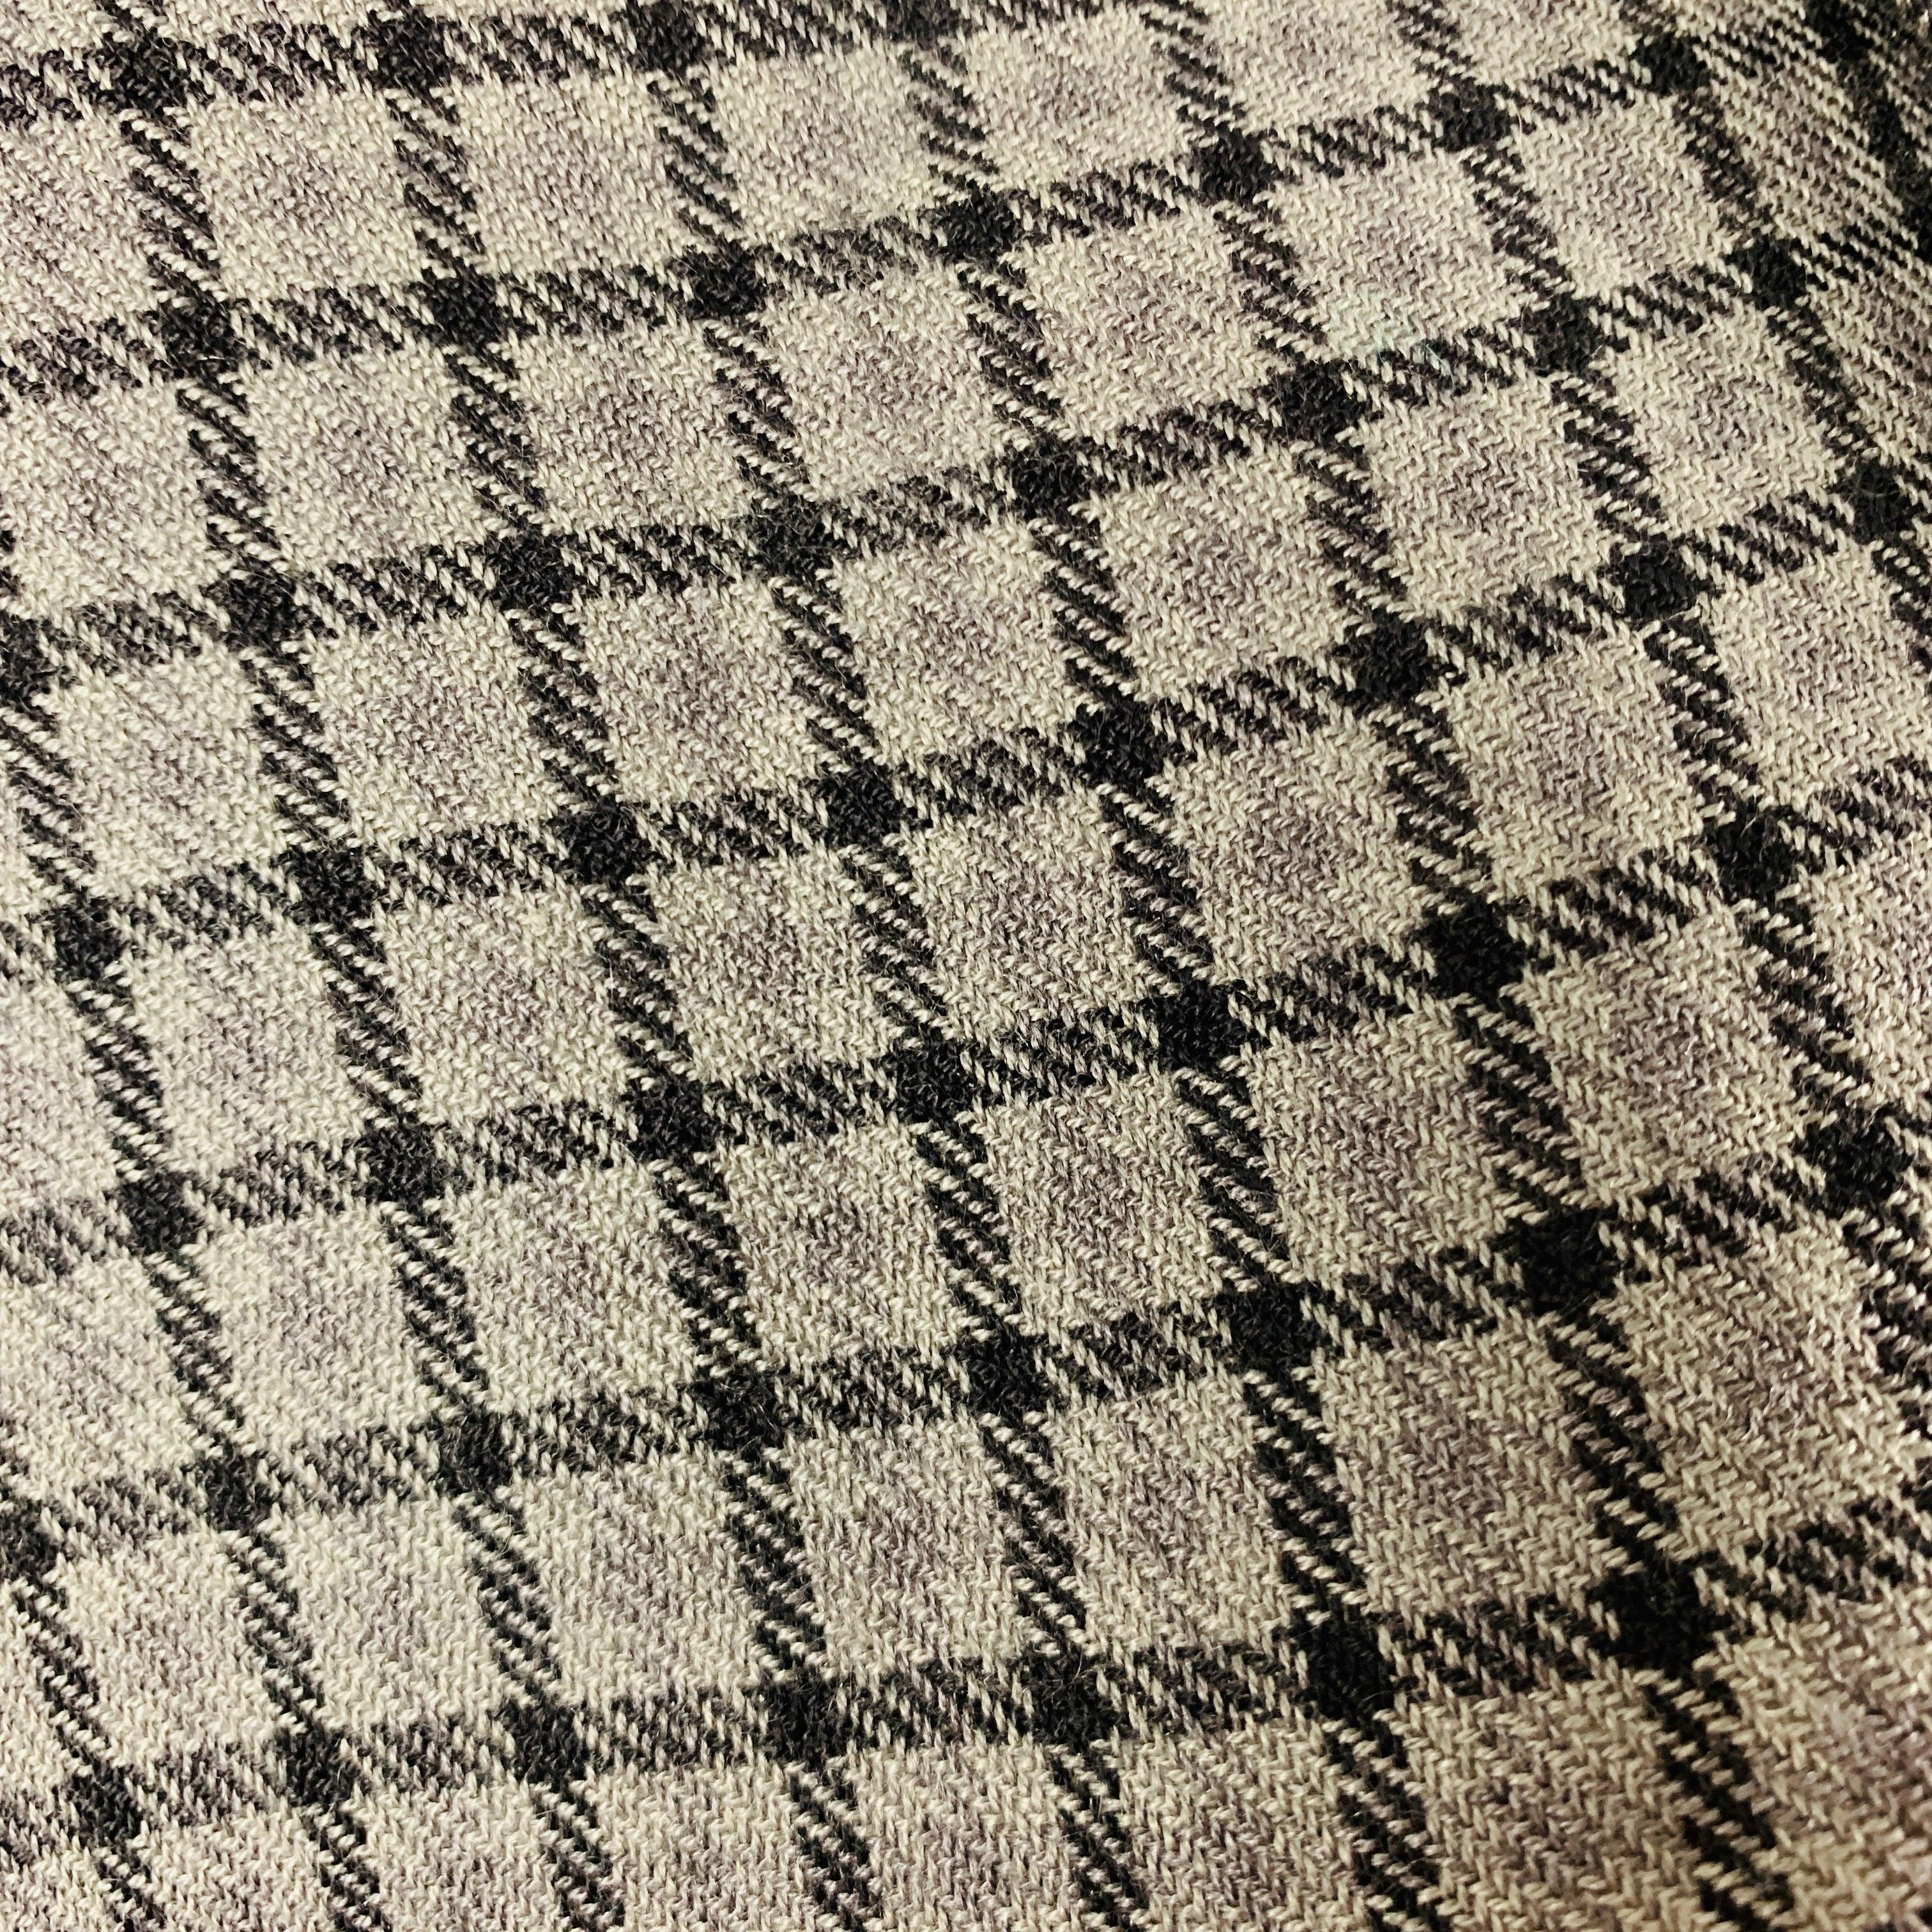 TOM FORD Grey Black Checkered Woven Scarves In Good Condition For Sale In San Francisco, CA